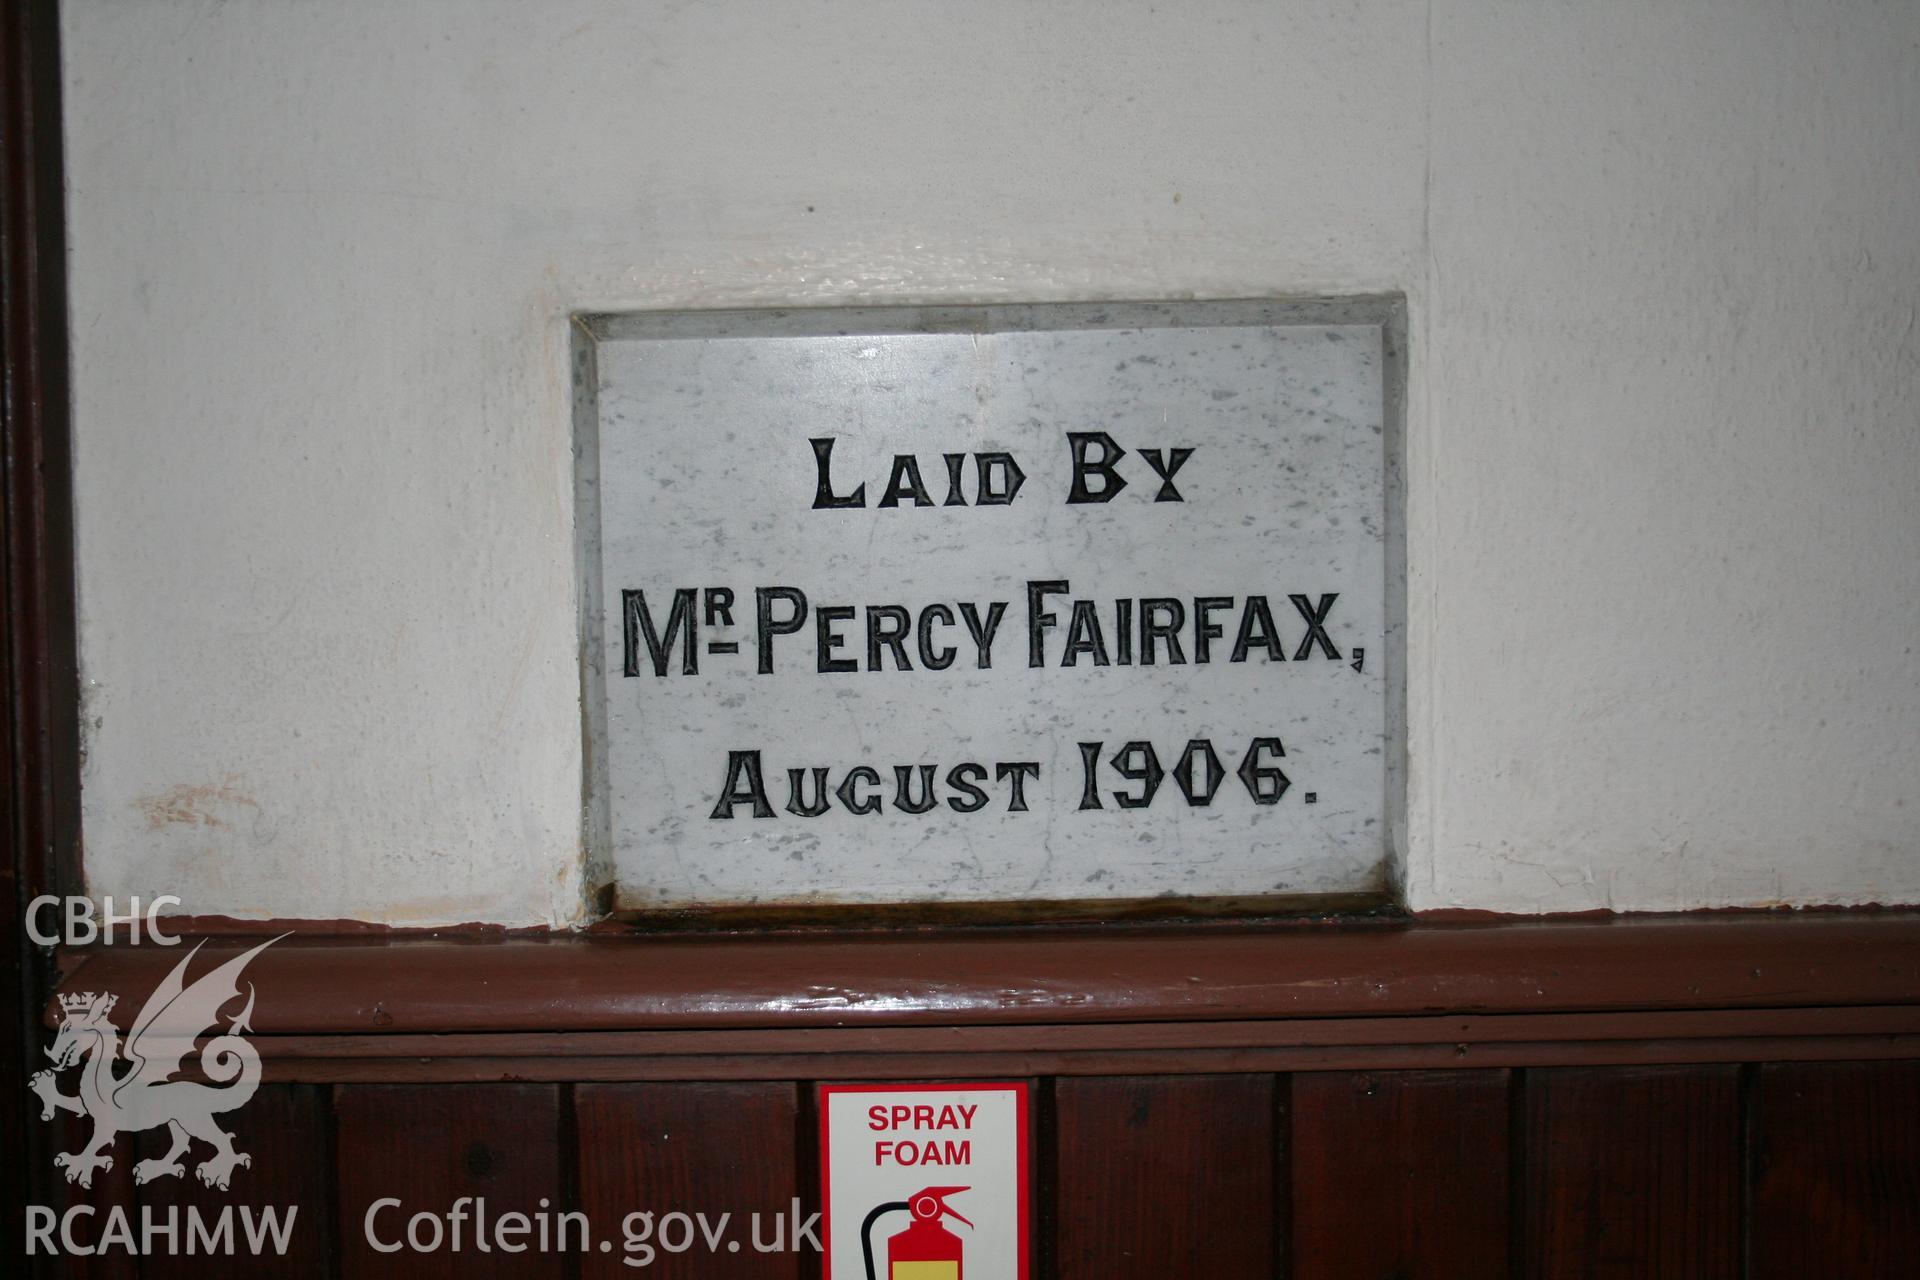 Hanbury Road baptist chapel, Bargoed, digital colour photograph showing completion stone laid by Mr Percy  Fairfax, August 1906, received in the course of Emergency Recording case ref no RCS2/1/2247.